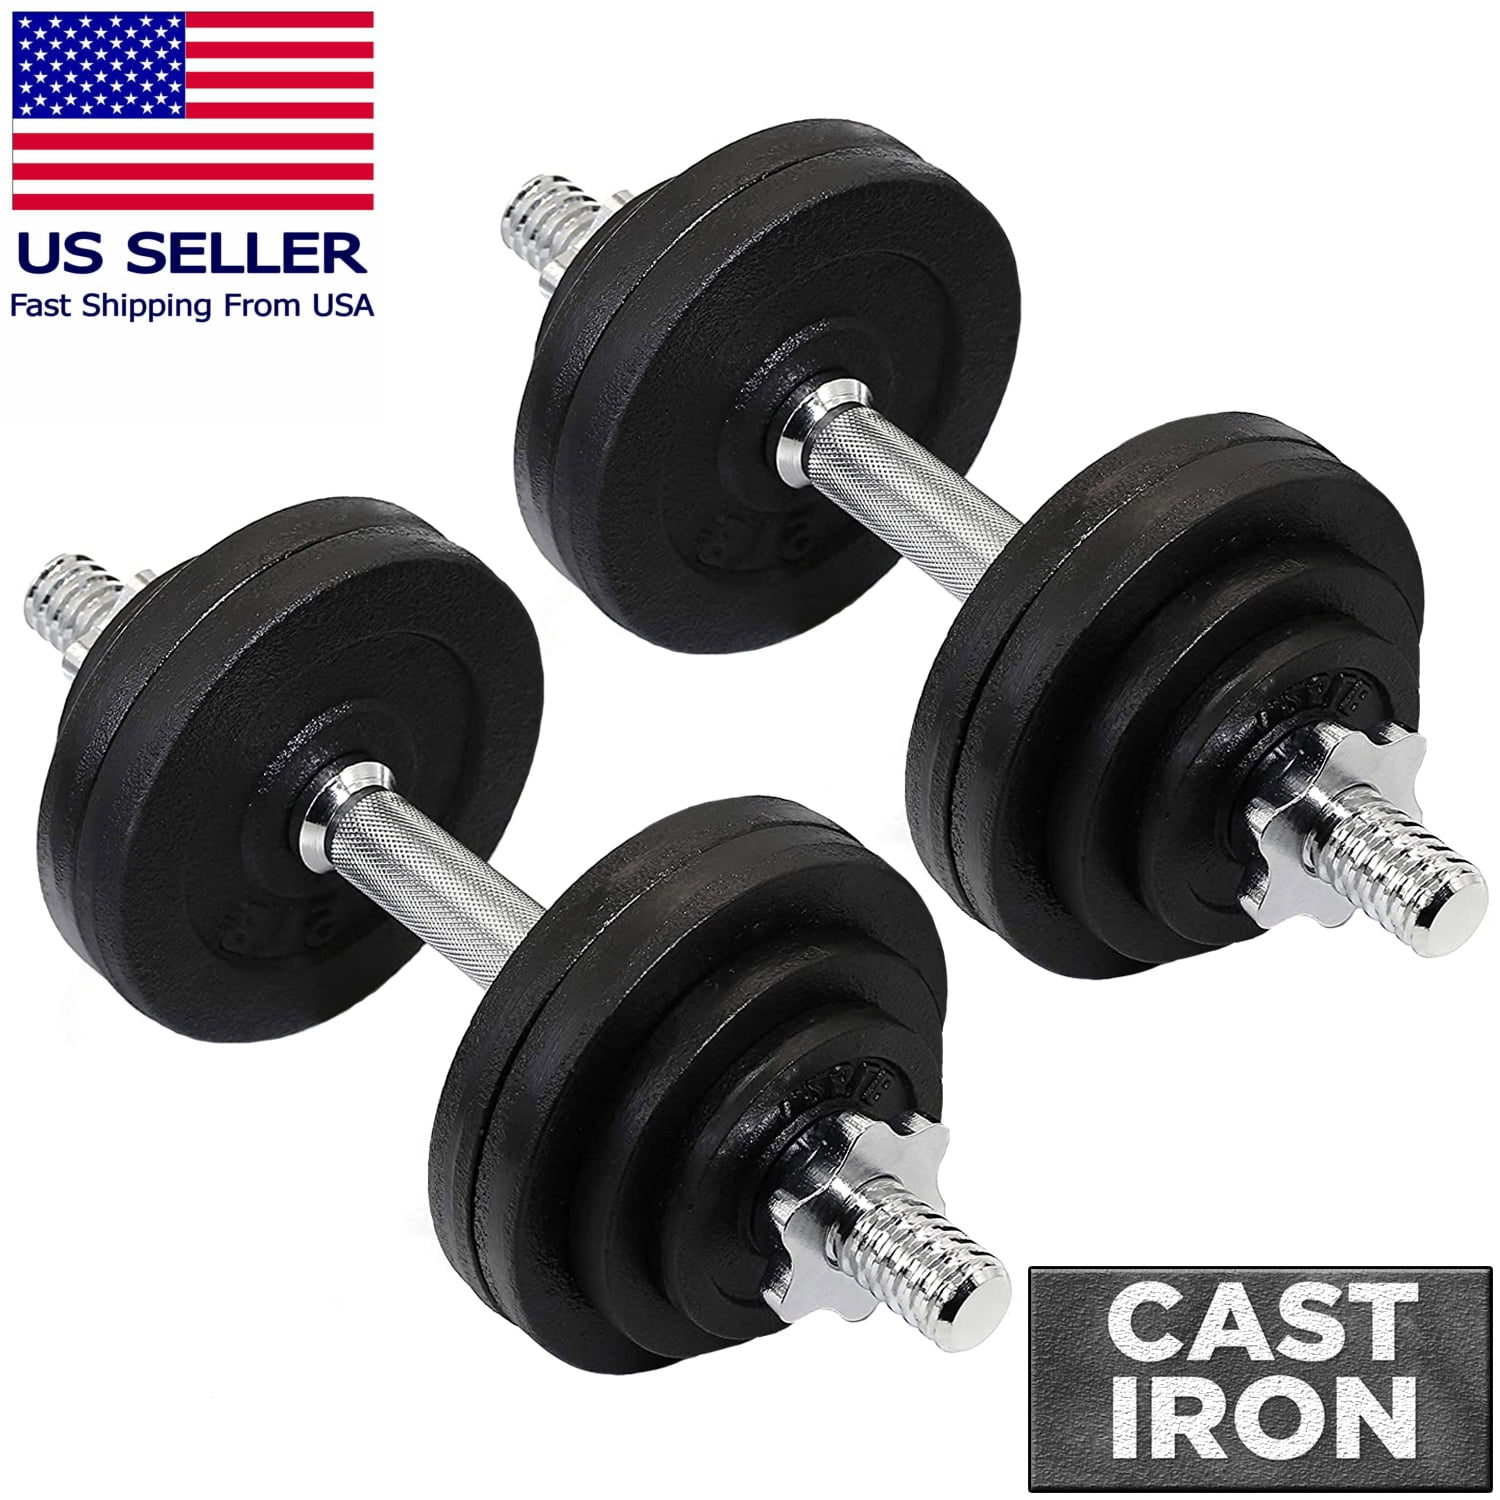 Yes4All 52.5LB Adjustable Dumbbell Weights Cast Iron Chrome Handle SINGLE ONLY 